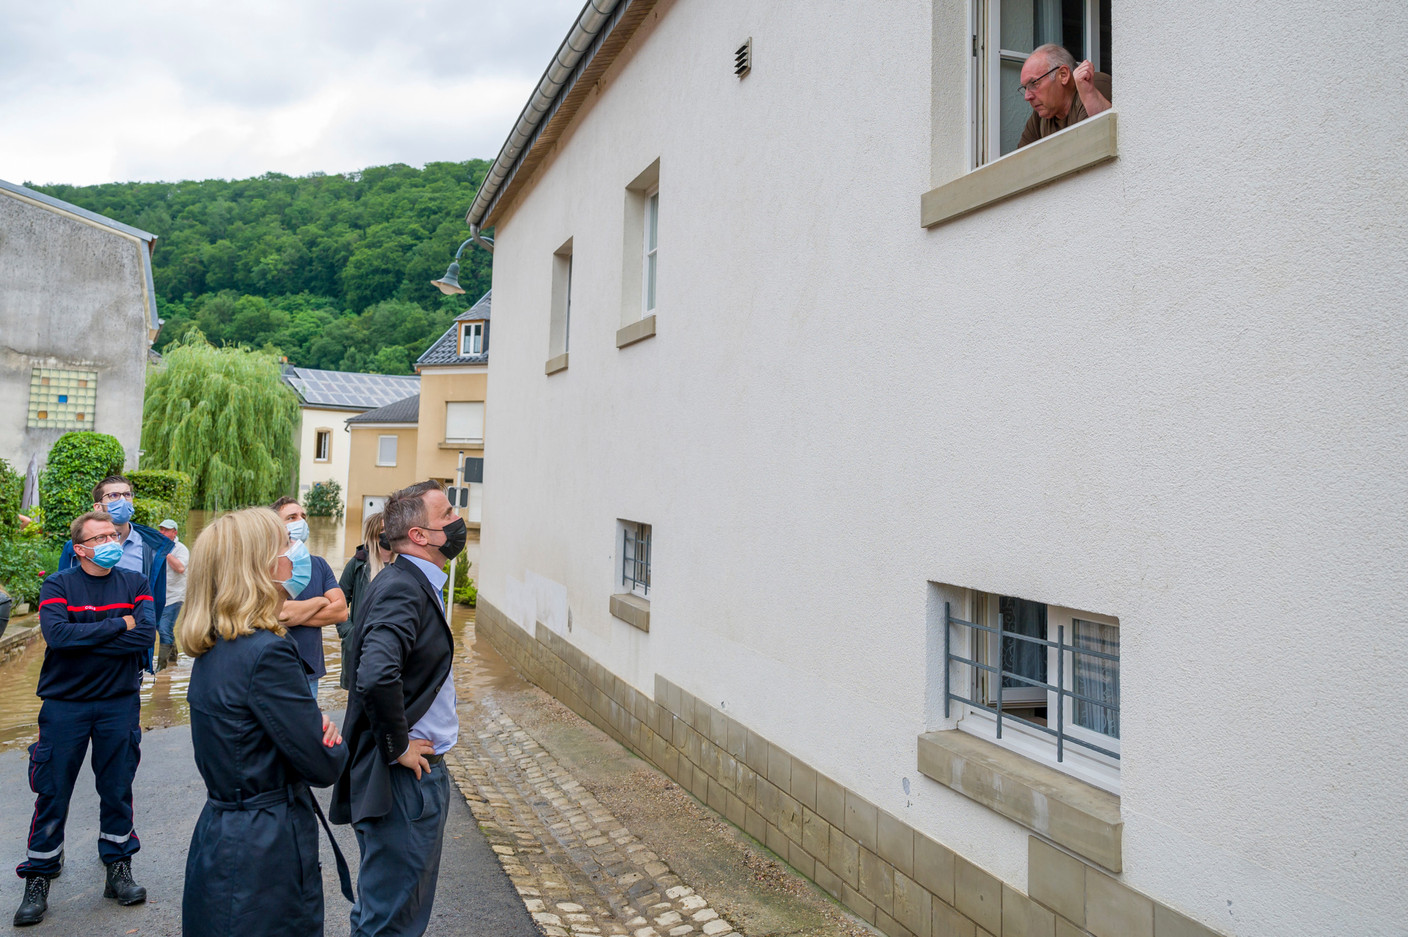 Xavier Bettel, the prime minister (DP), and Taina Bofferding, the interior minister (LSAP), are seen inspecting Born, located along the Sauer river in eastern Luxembourg, 15 July 2021. SIP / Jean-Christophe Verhaegen